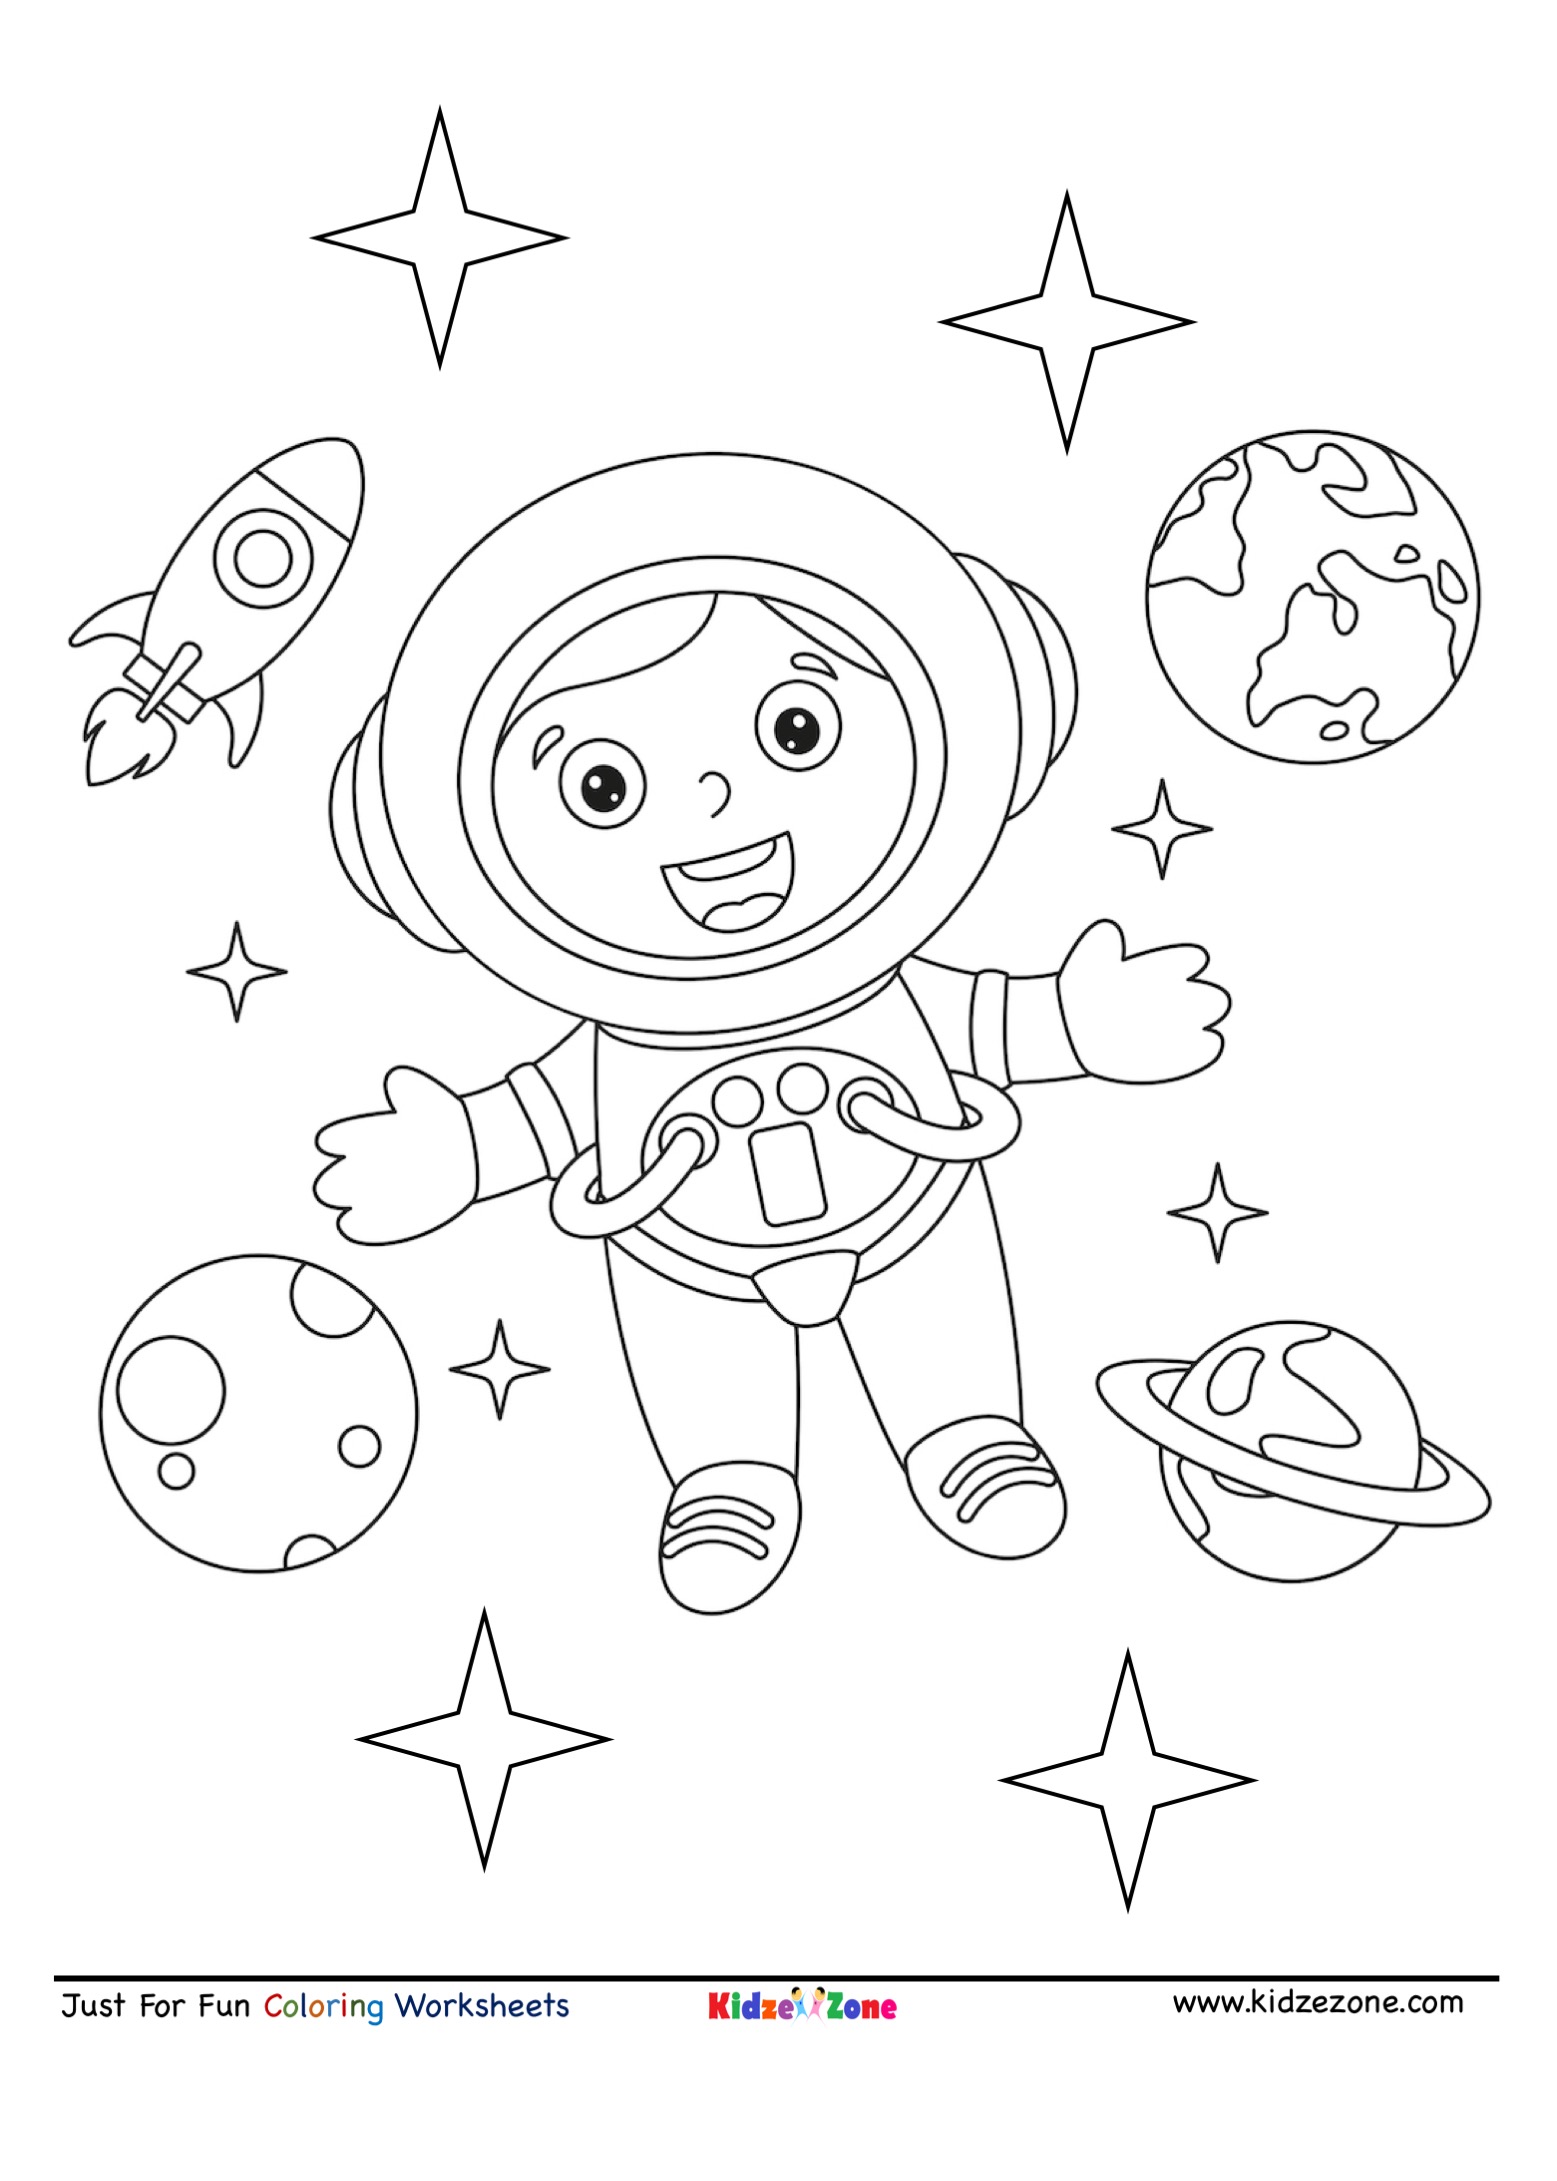 Astronaut in Space Coloring Page   KidzeZone